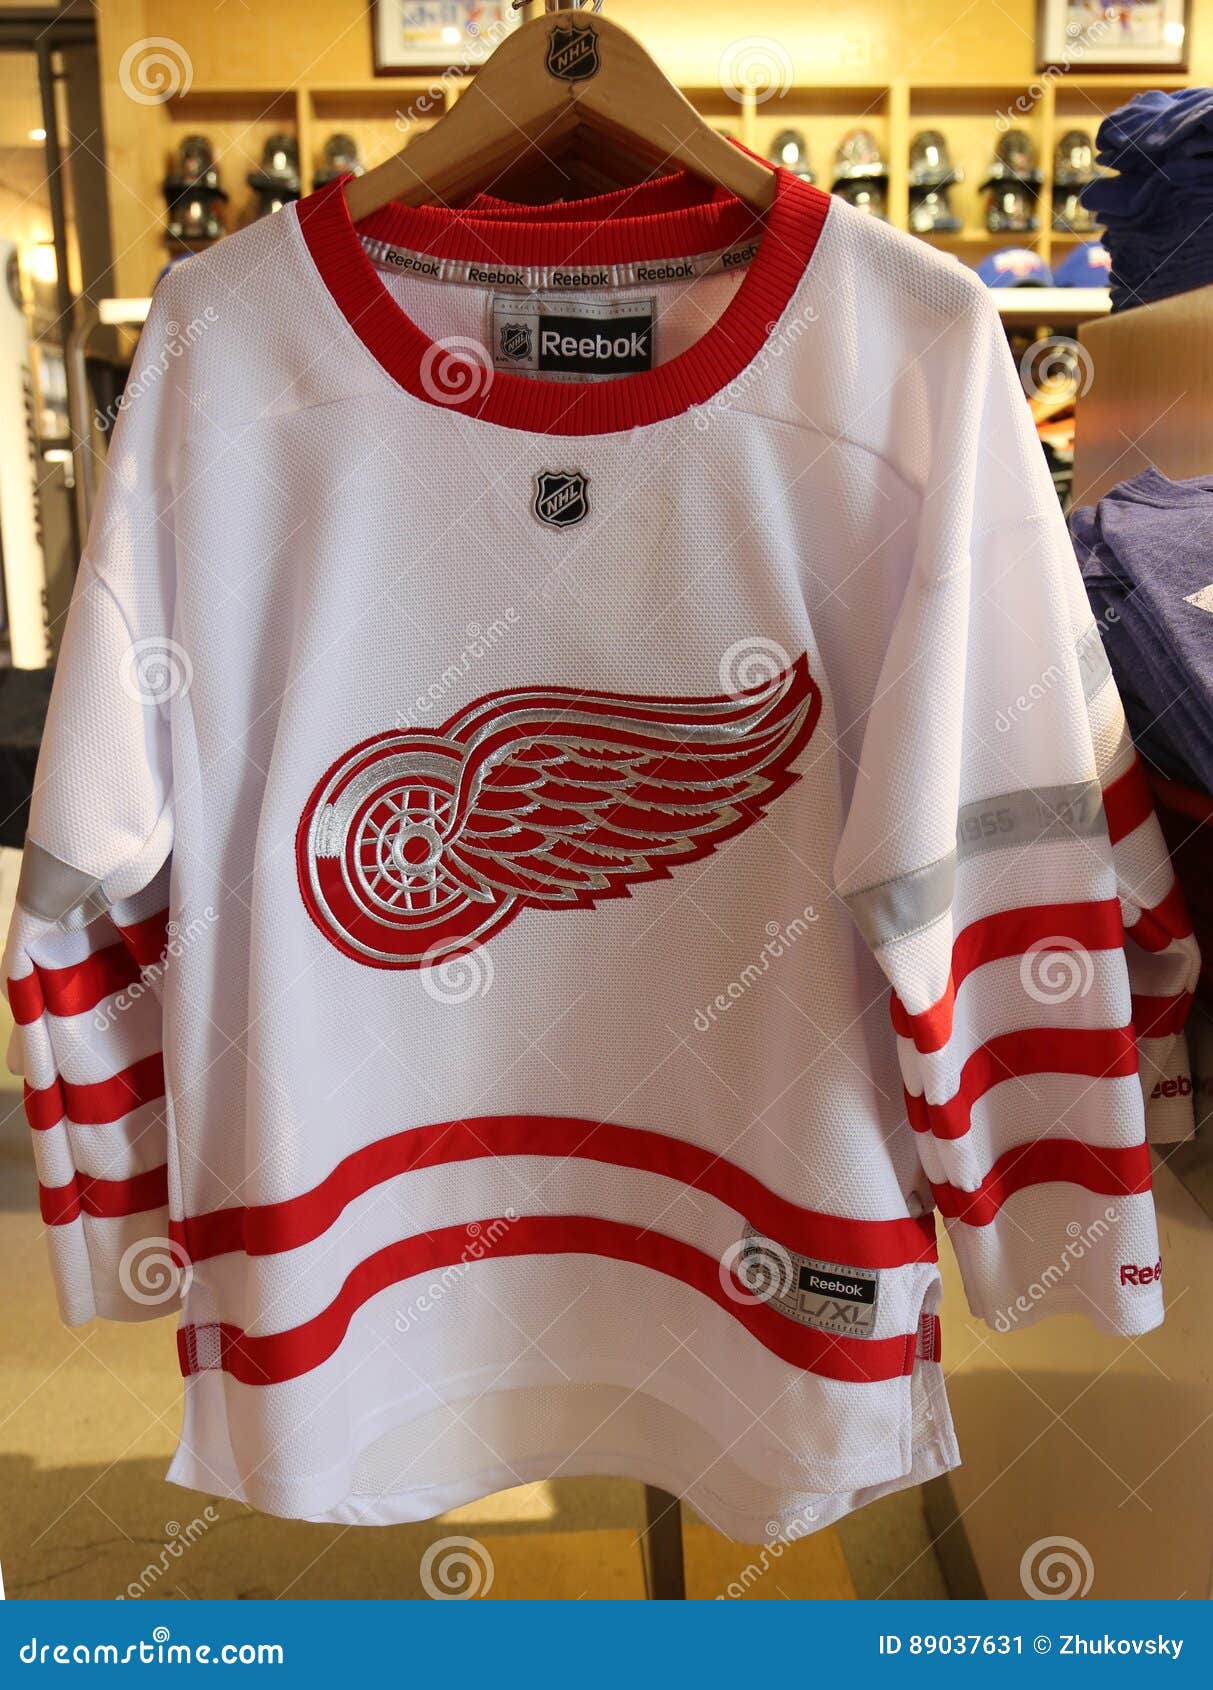 The retail design at the Detroit Pistons & Detroit Red Wings Team